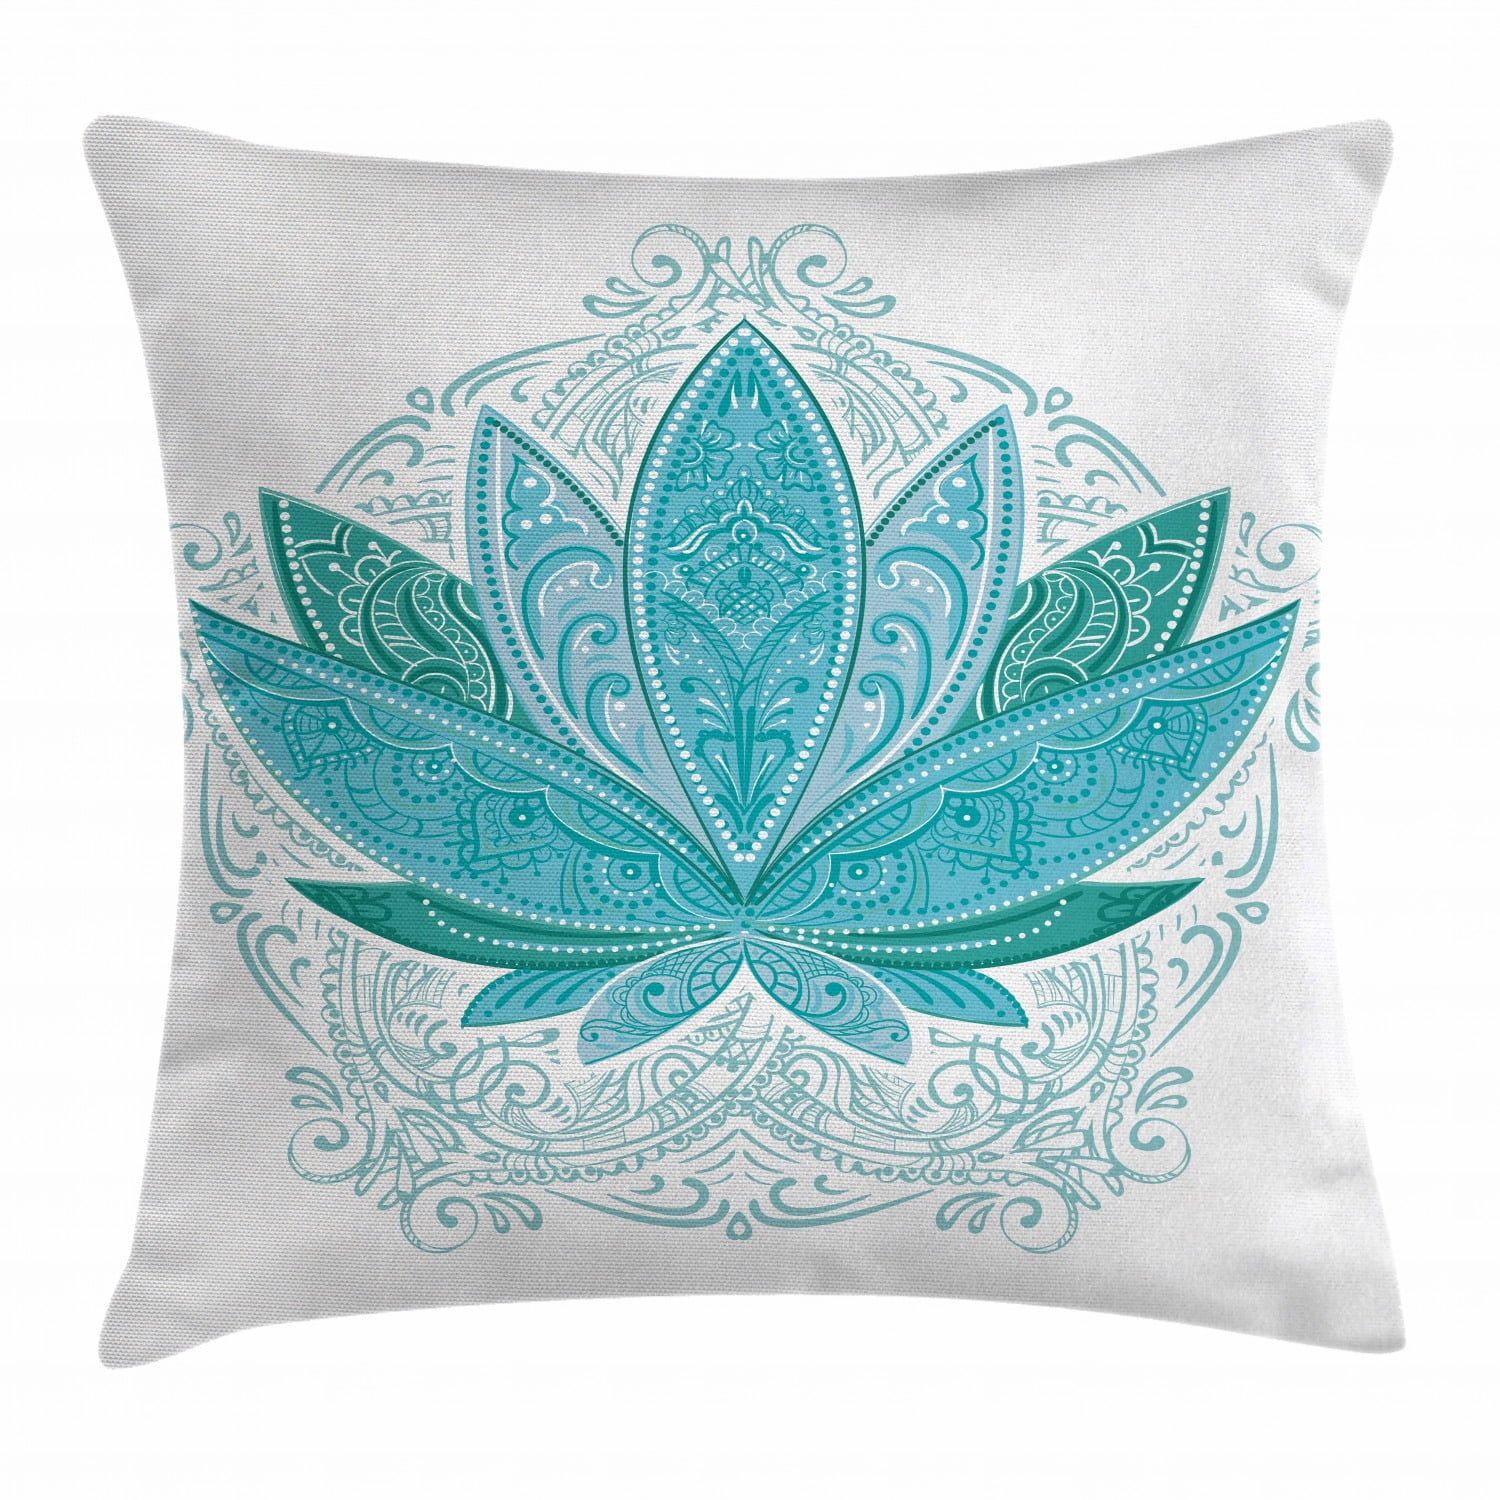 Paisley Flower Throw Pillow Cover Traditional Ethnic Floral Red Teal White Waist Lumbar Cotton Linen Home Living Room Decorative Throw Pillow Cases Cushion Cover 12x20 Inch Rectangle Waist Pillowcase